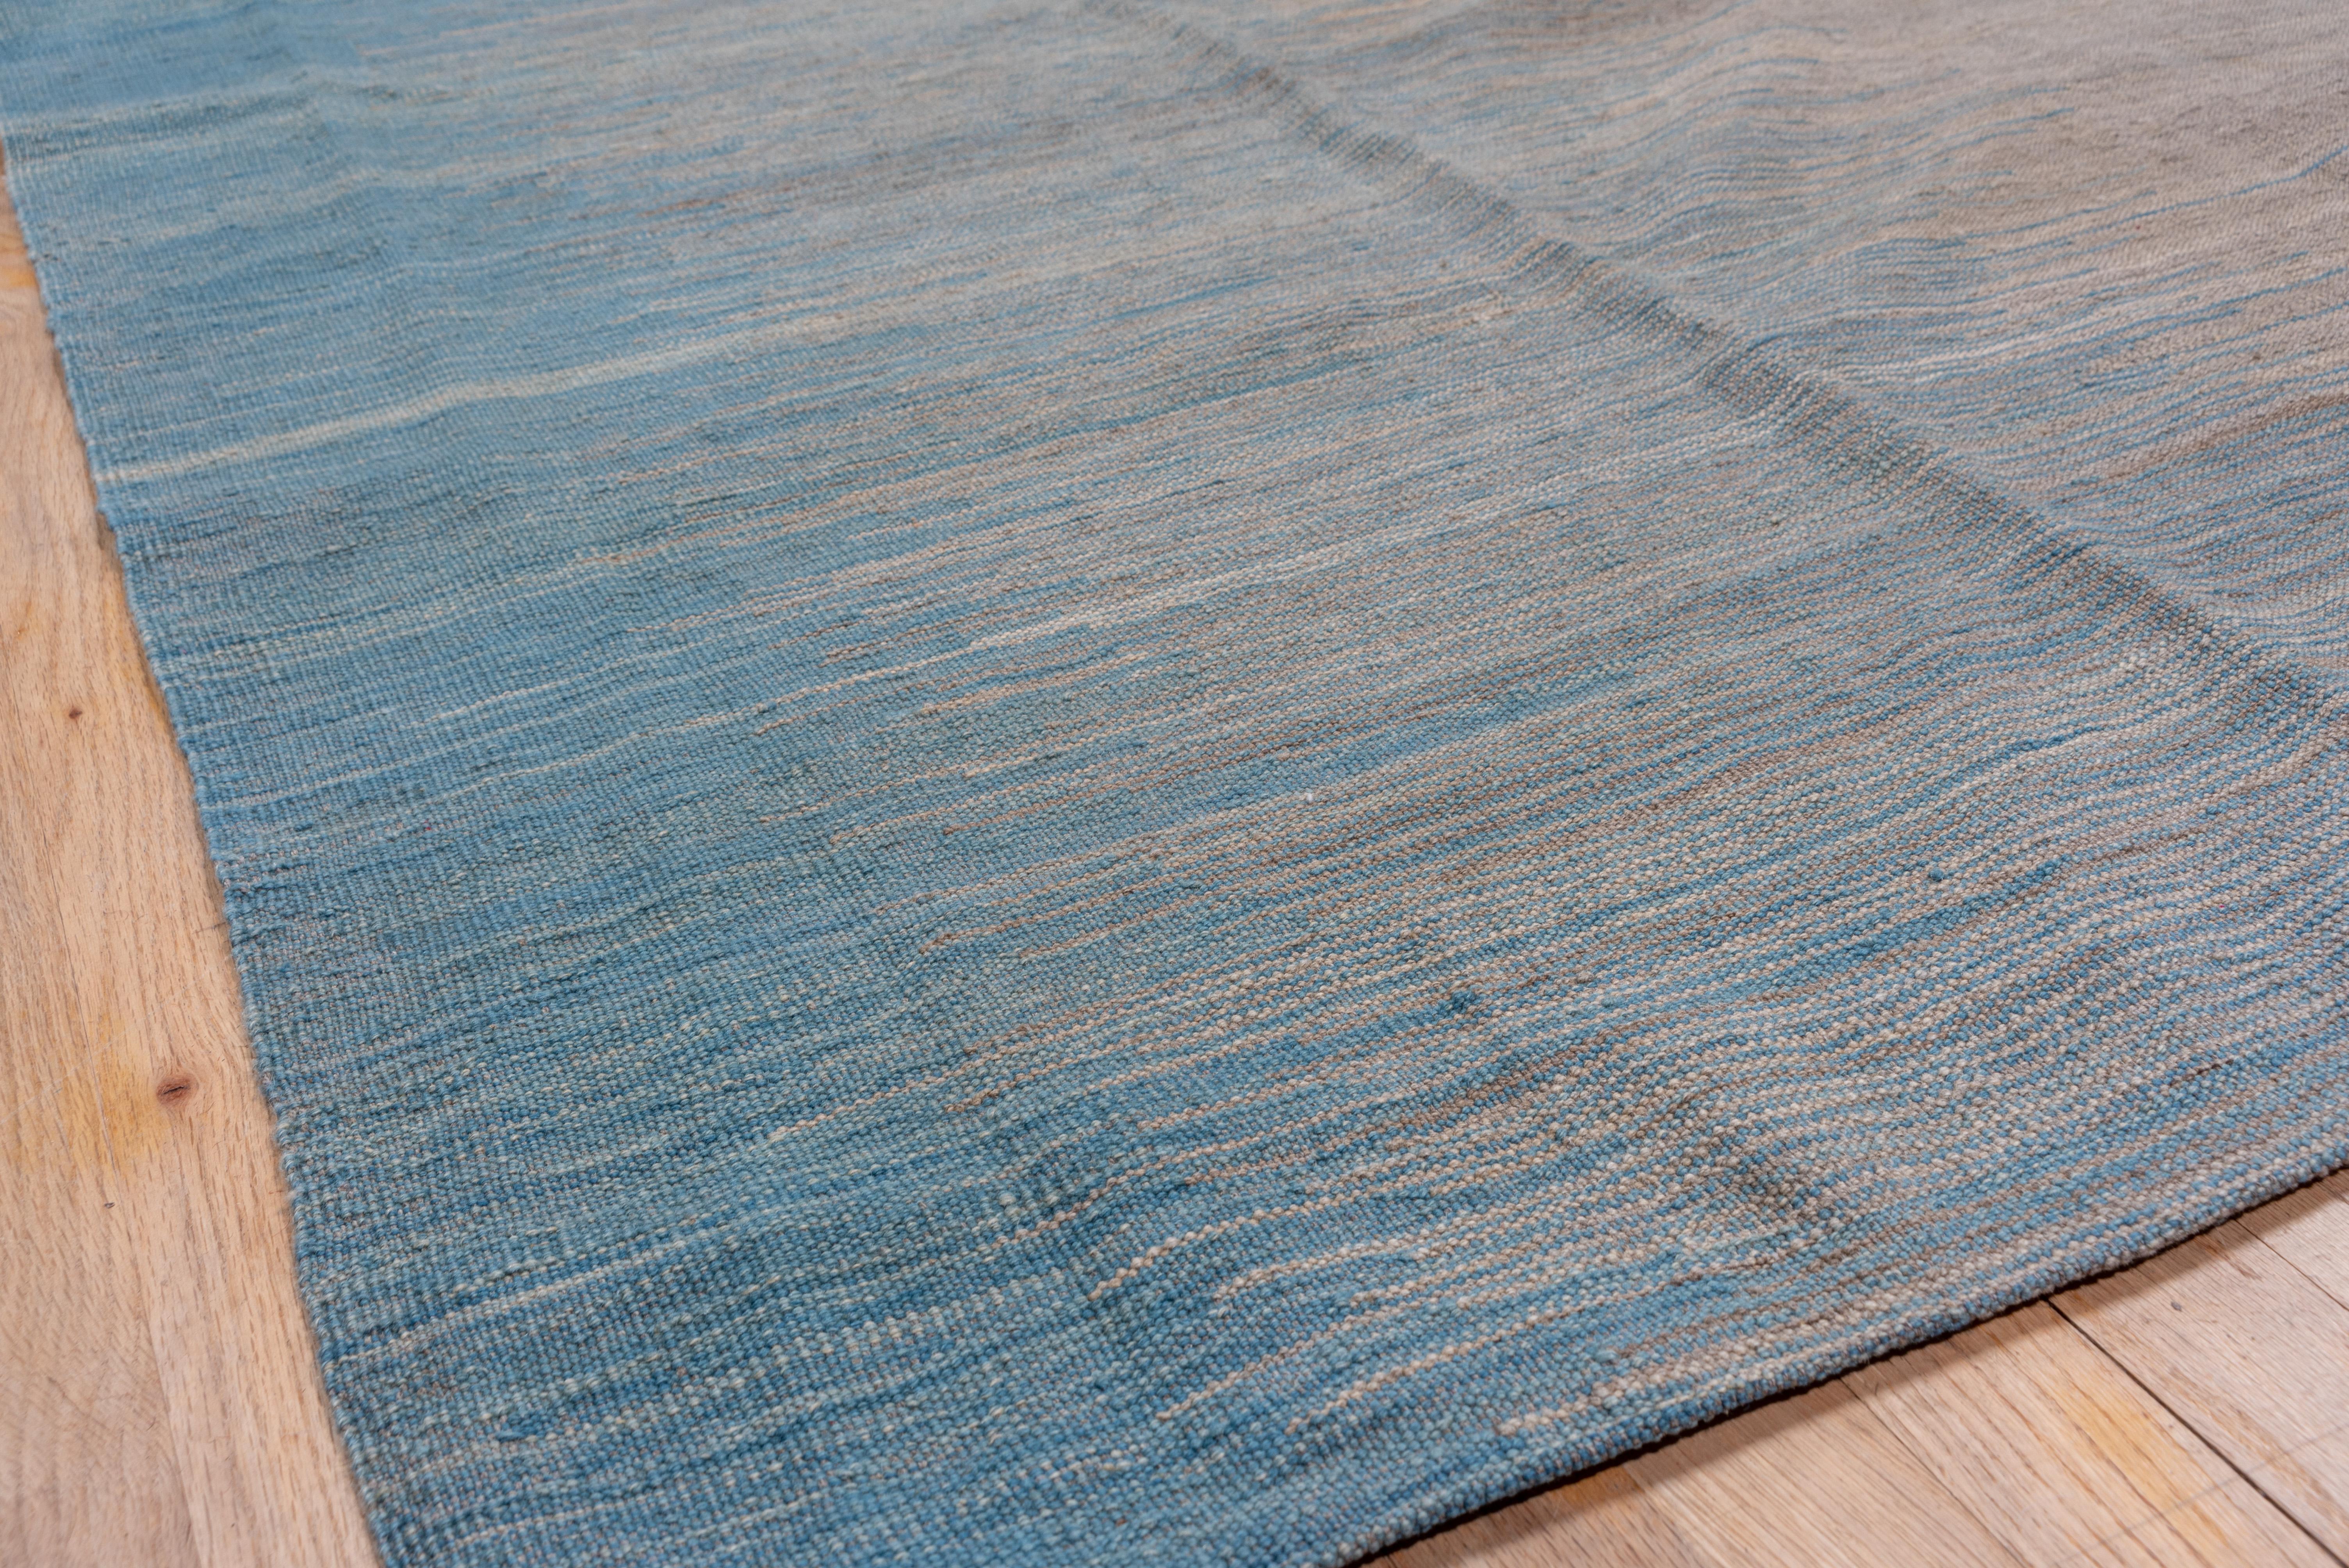 A very simple, and easy handwoven flatweave to place in a room in need of some good cool tones. Blue and gray palette with hints of brown.